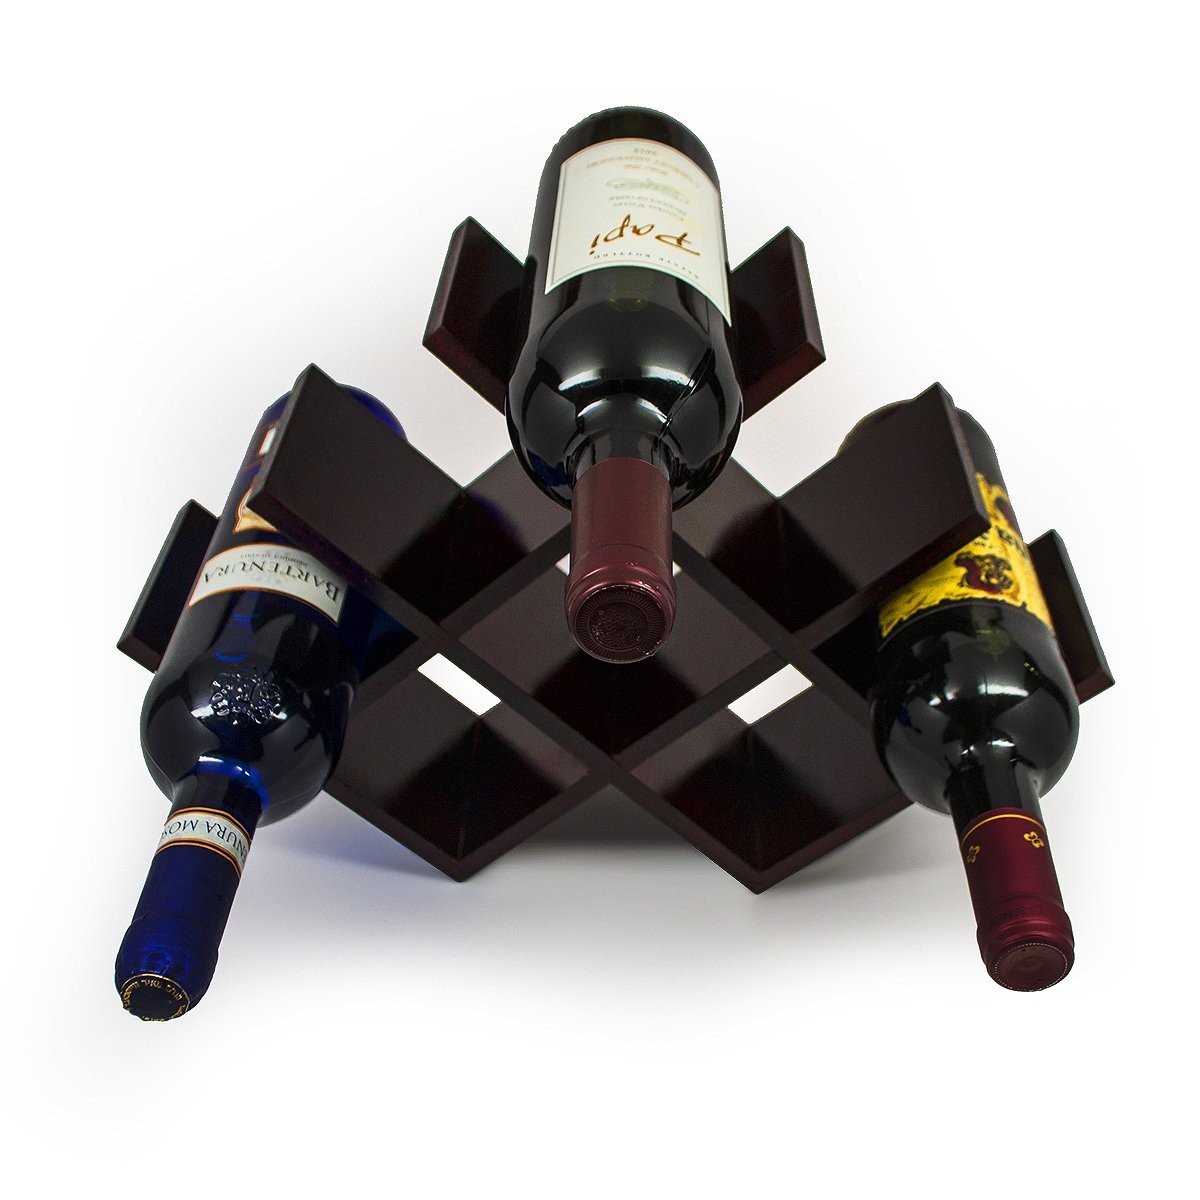 Fine Craftwork Acrylic Bottle Rack , Butterfly Wine Rack 17.3x11.5x4 Inches